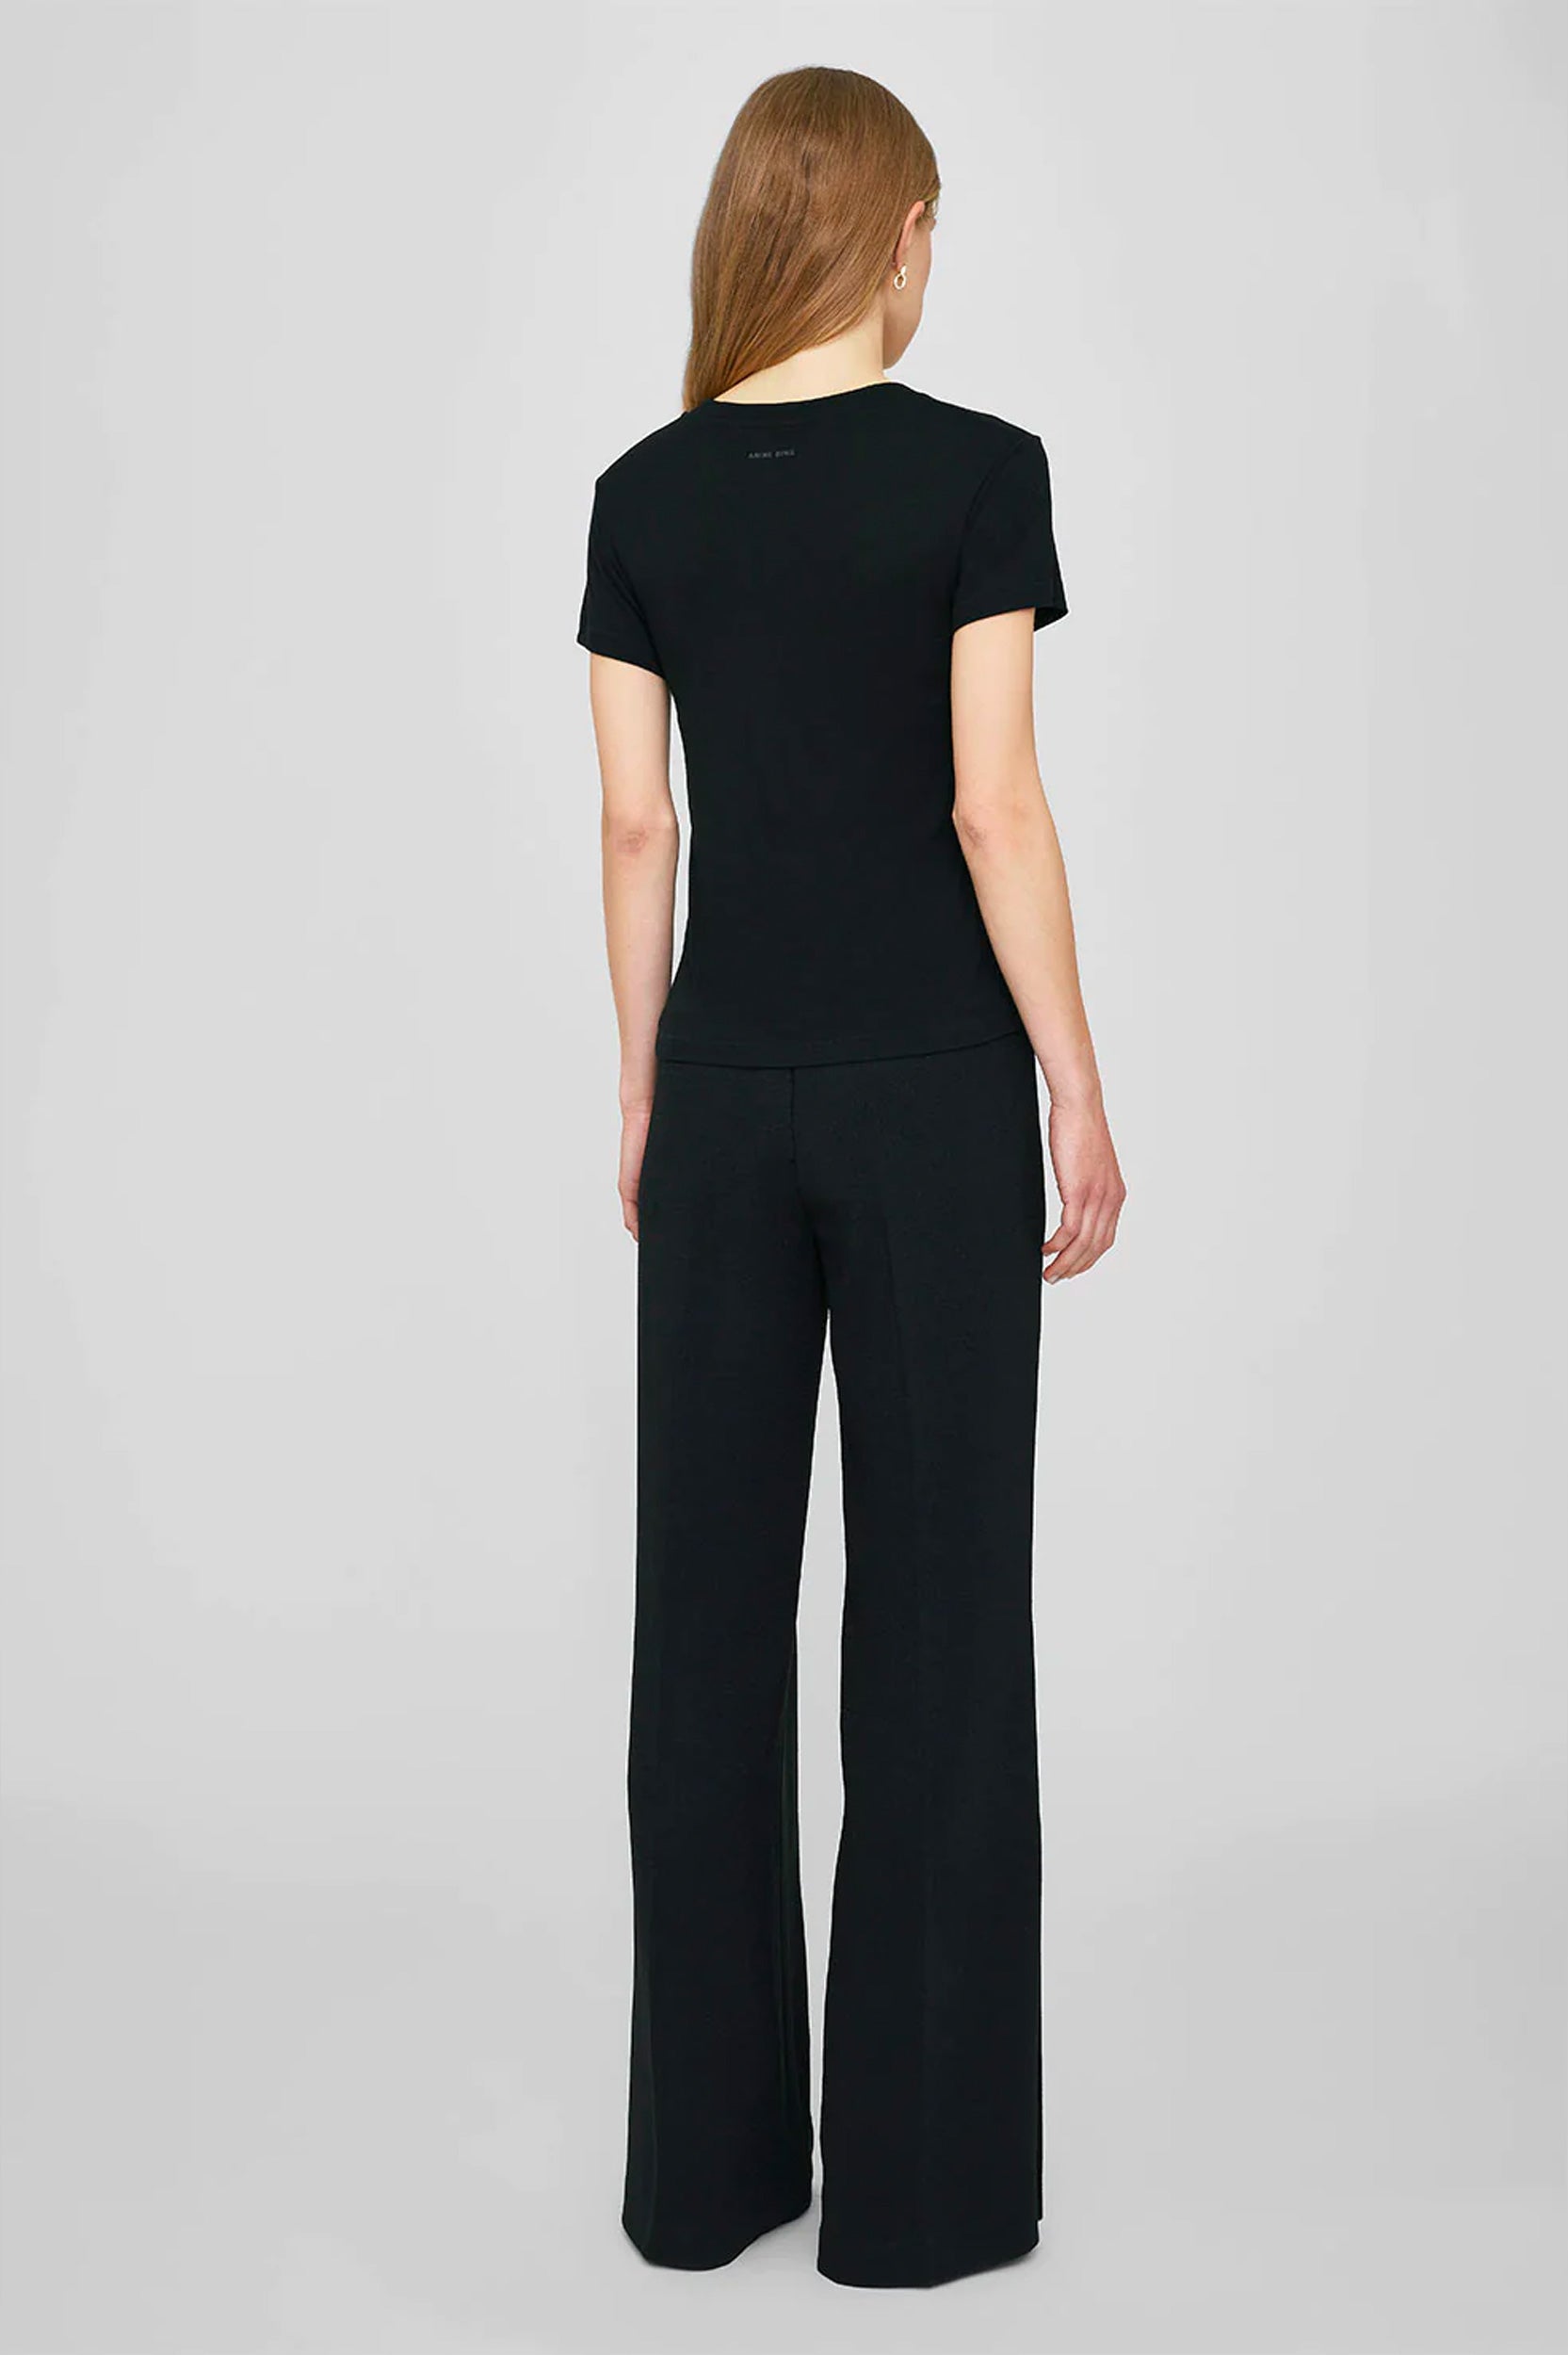 Amani Tee in Black Cashmere Blend